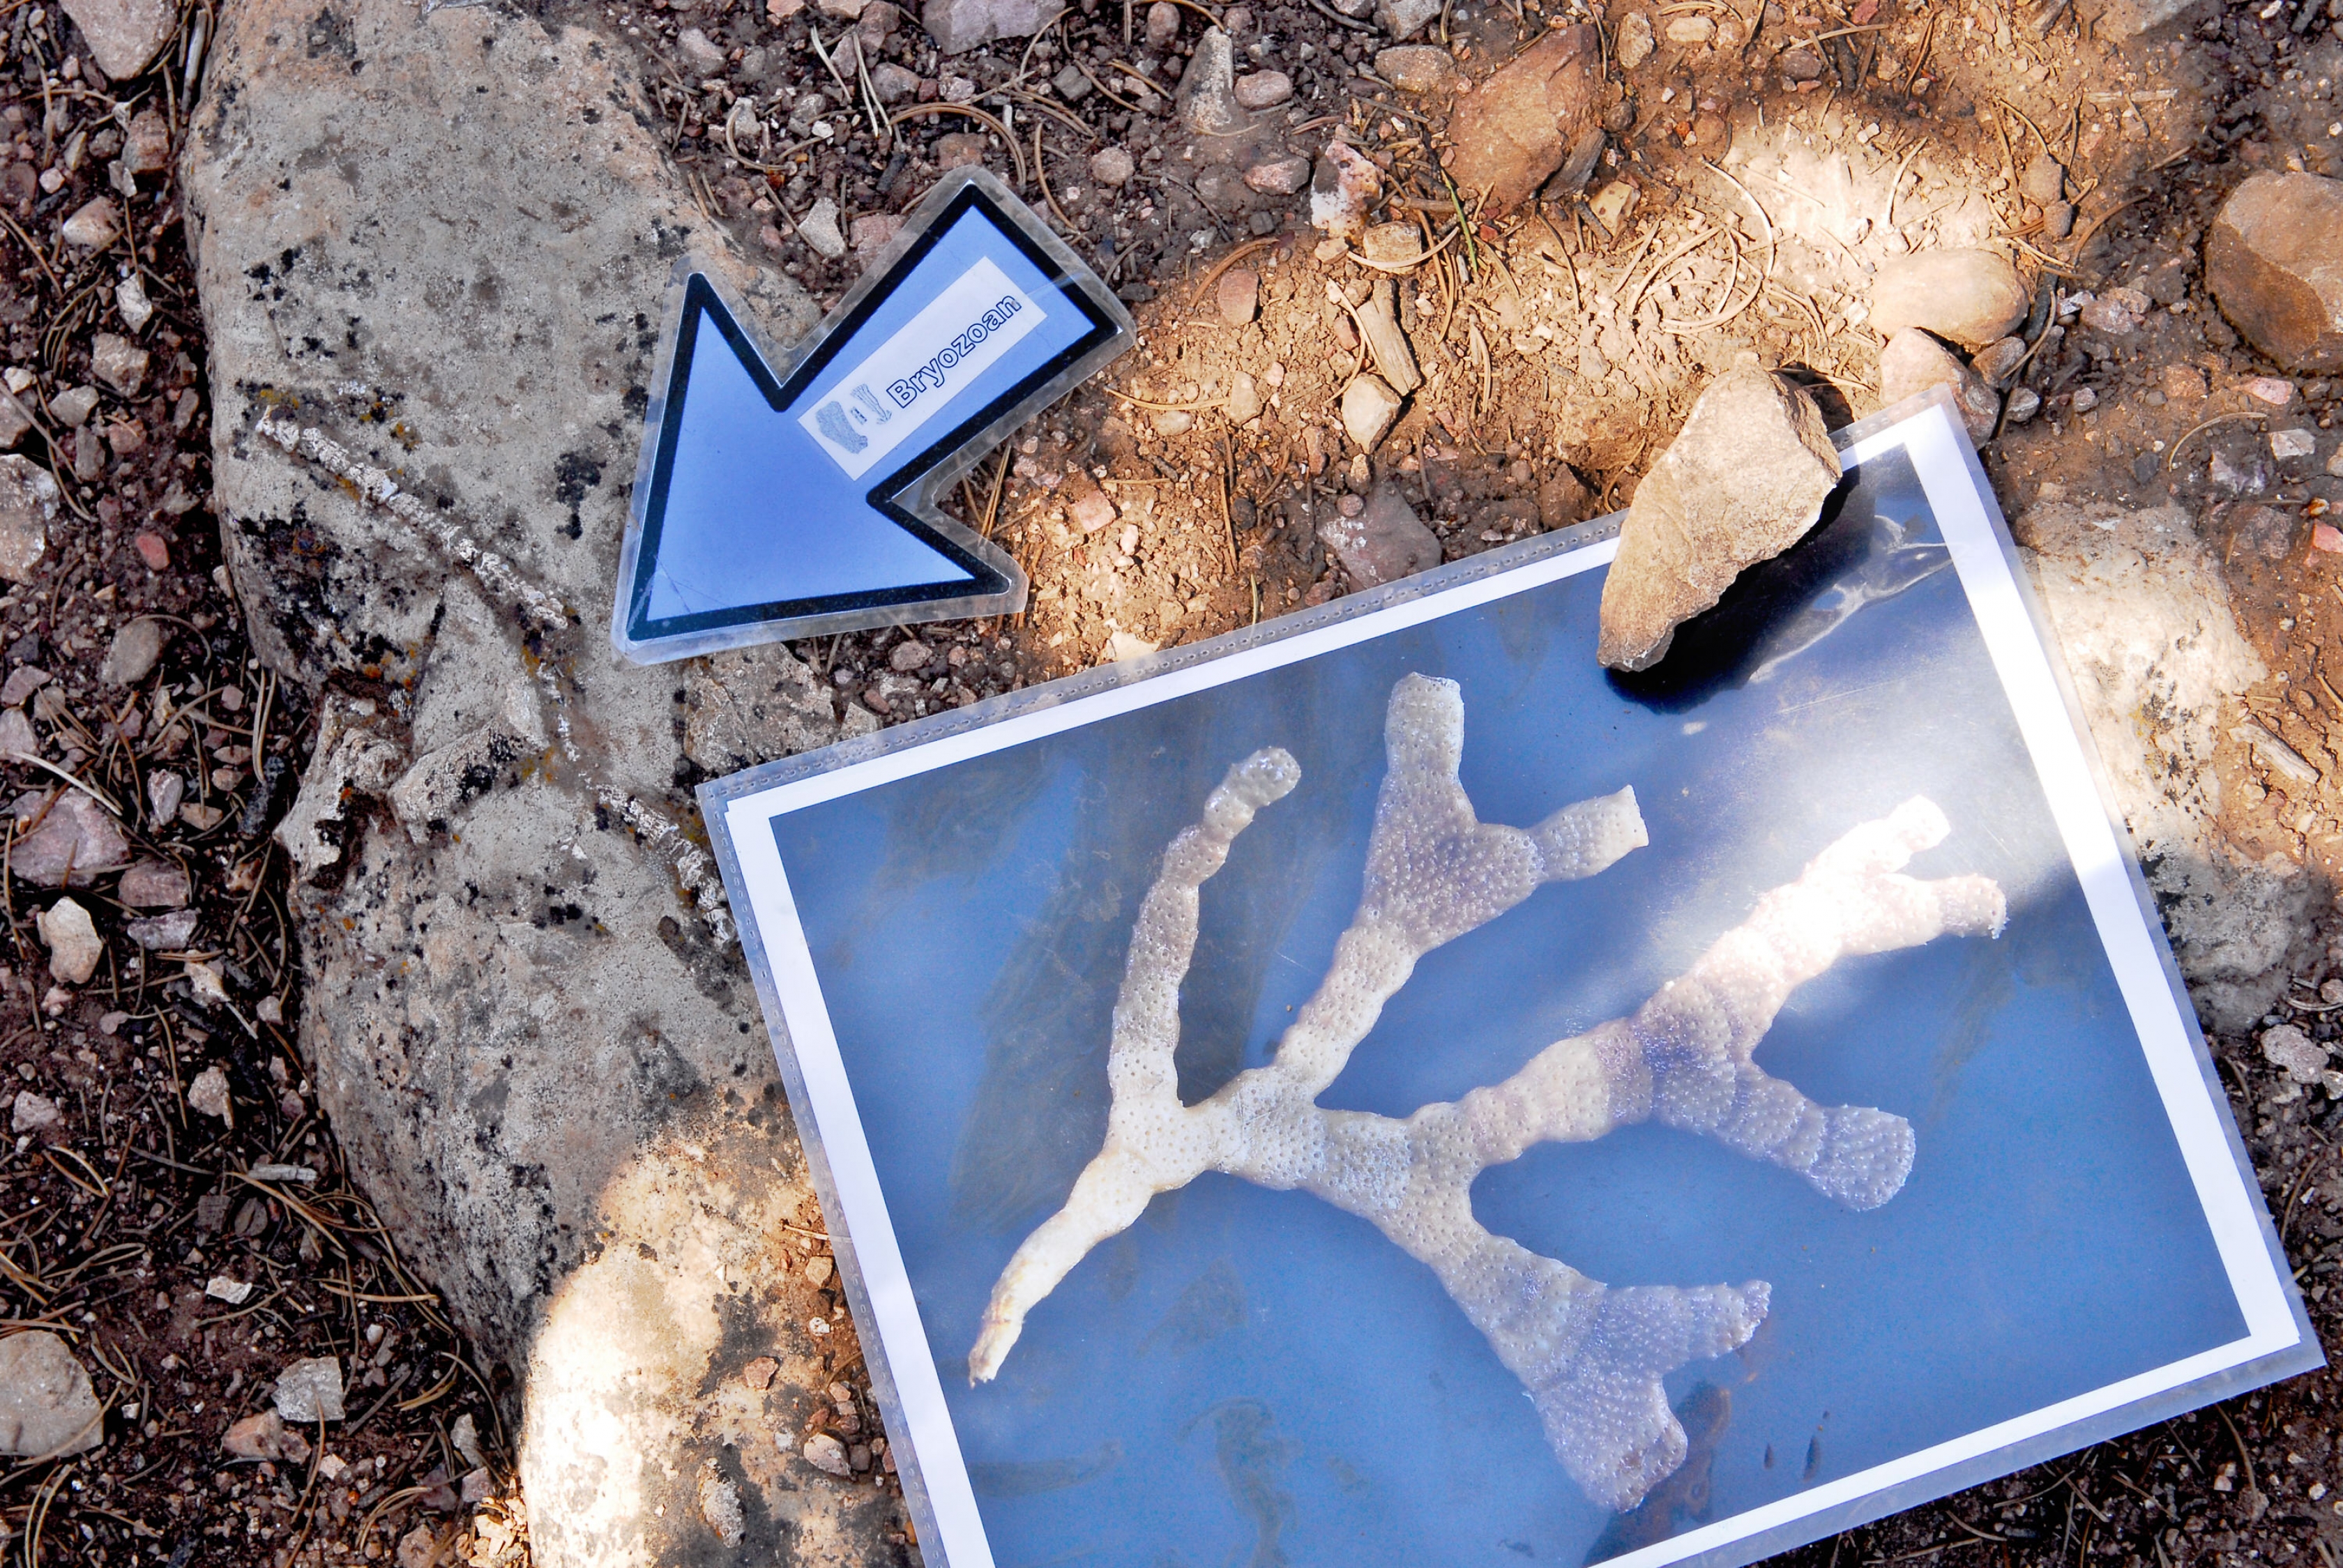 Bryozoan fossil in the Kaibab limestone next to an identifying marker at Grand Canyon National Park